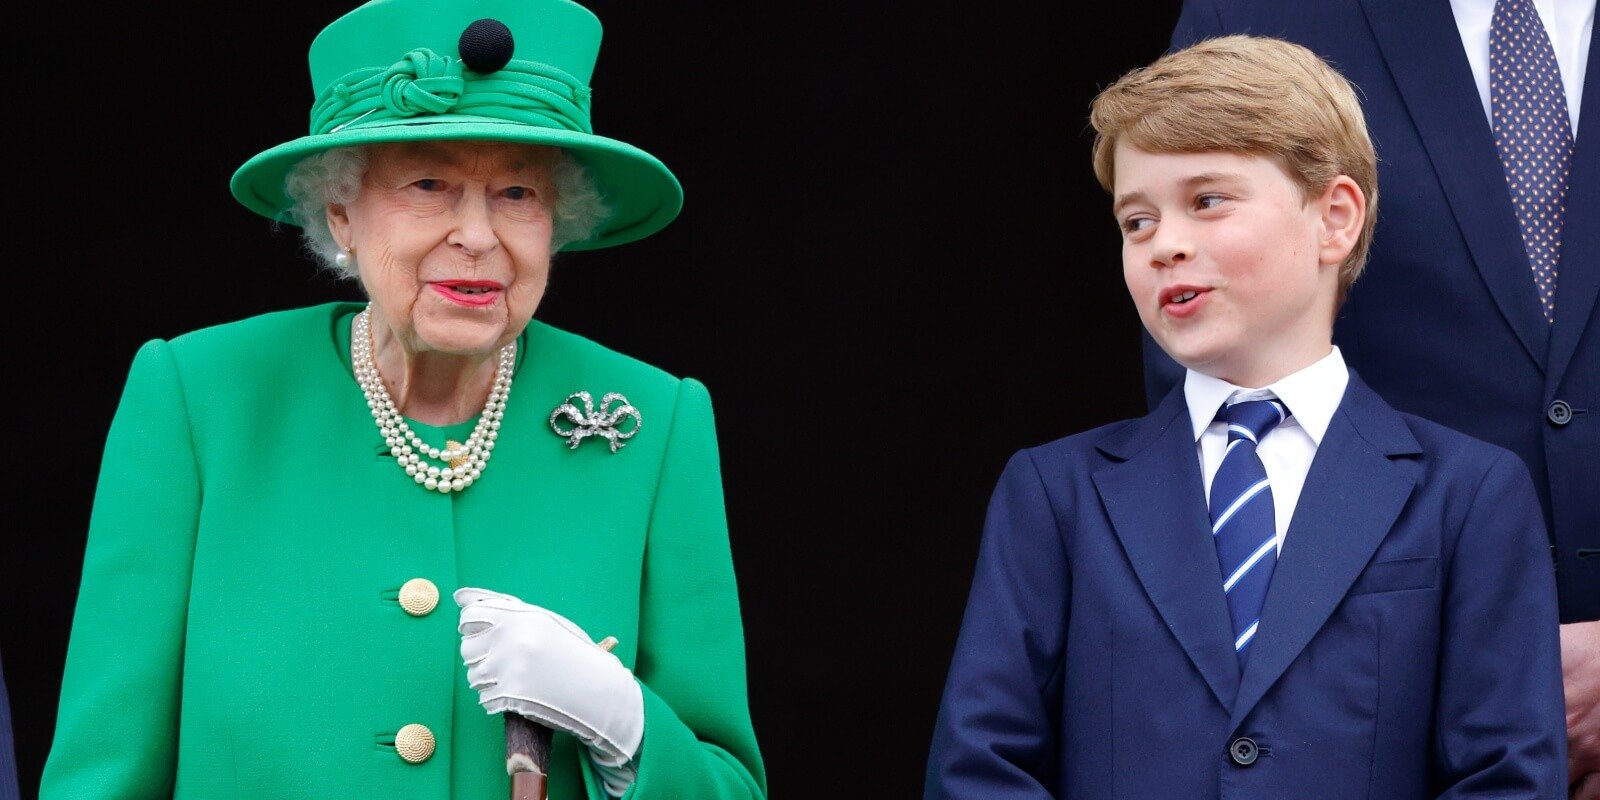 Queen Elizabeth and Prince George photographed following the Platinum Pageant on June 5, 2022 in London, England.